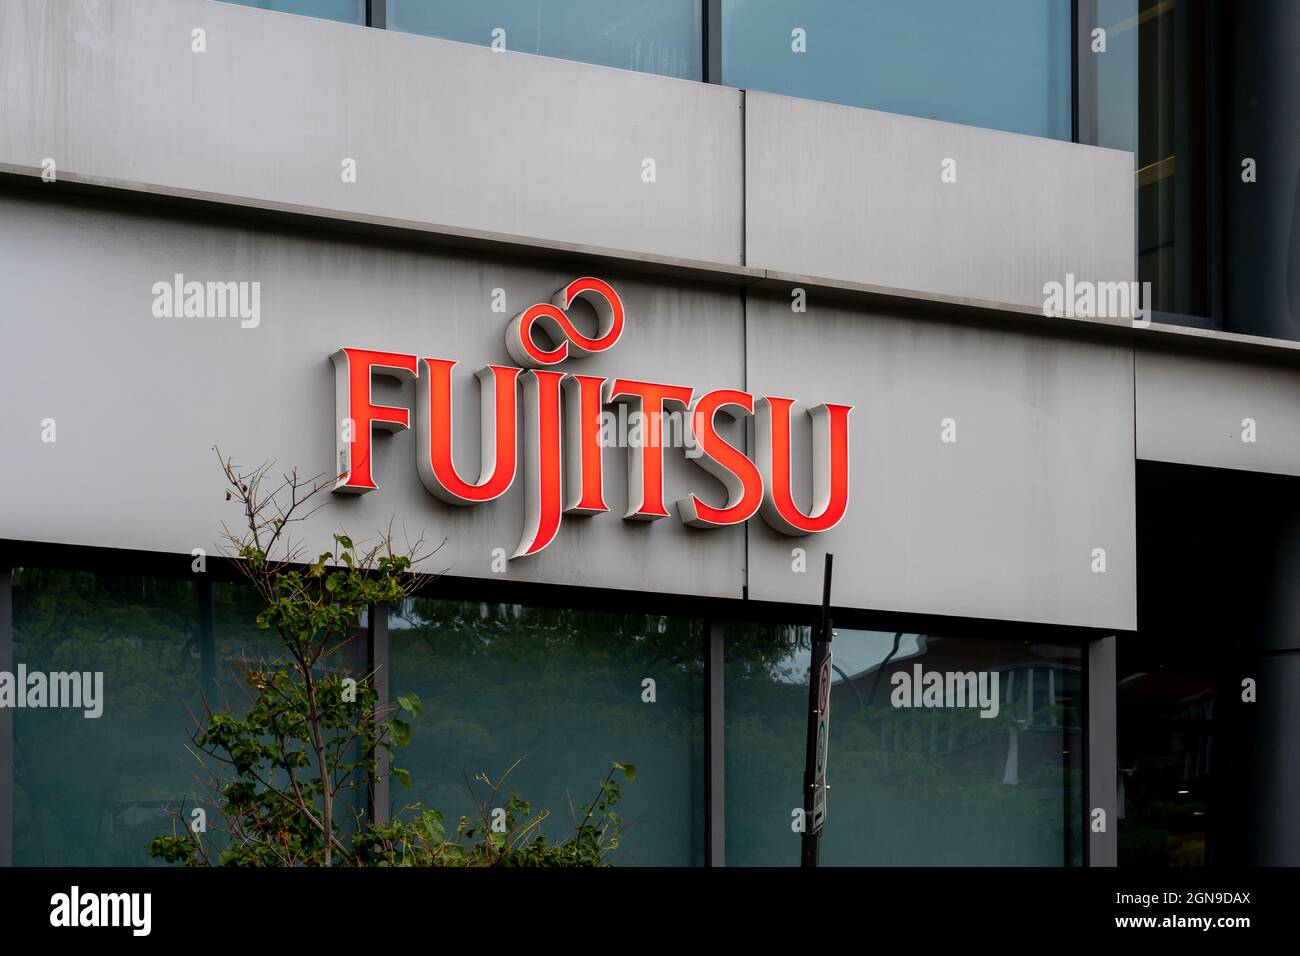 Montreal, QC, Canada - September 6, 2021: Close up of Fujitsu sign on their office building in Montreal, QC, Canada. Stock Photo